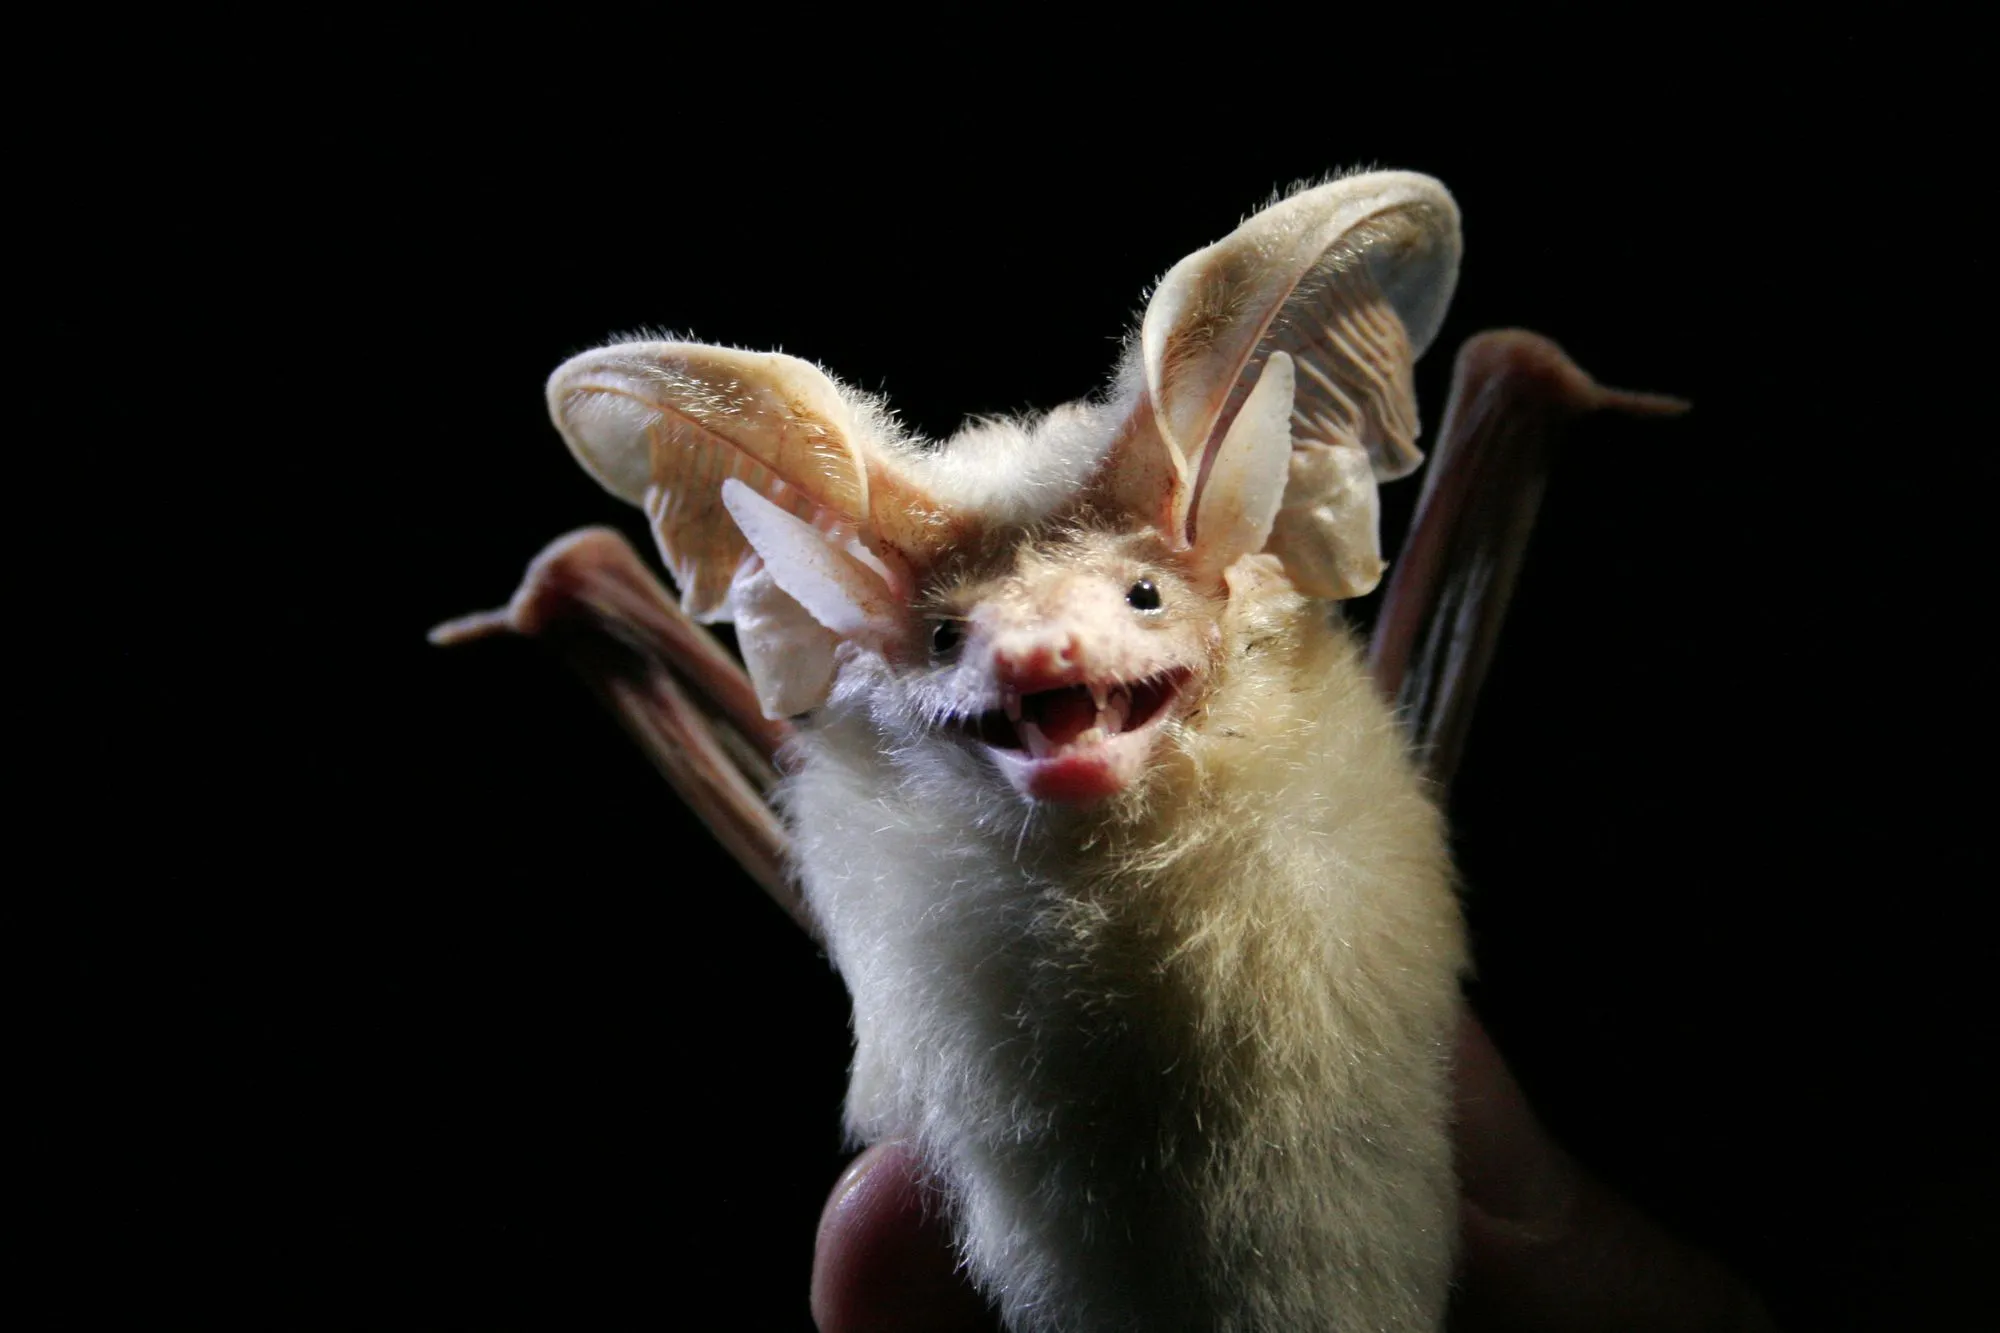 These desert bats have a low band of skin connecting their two large ears across the forehead.